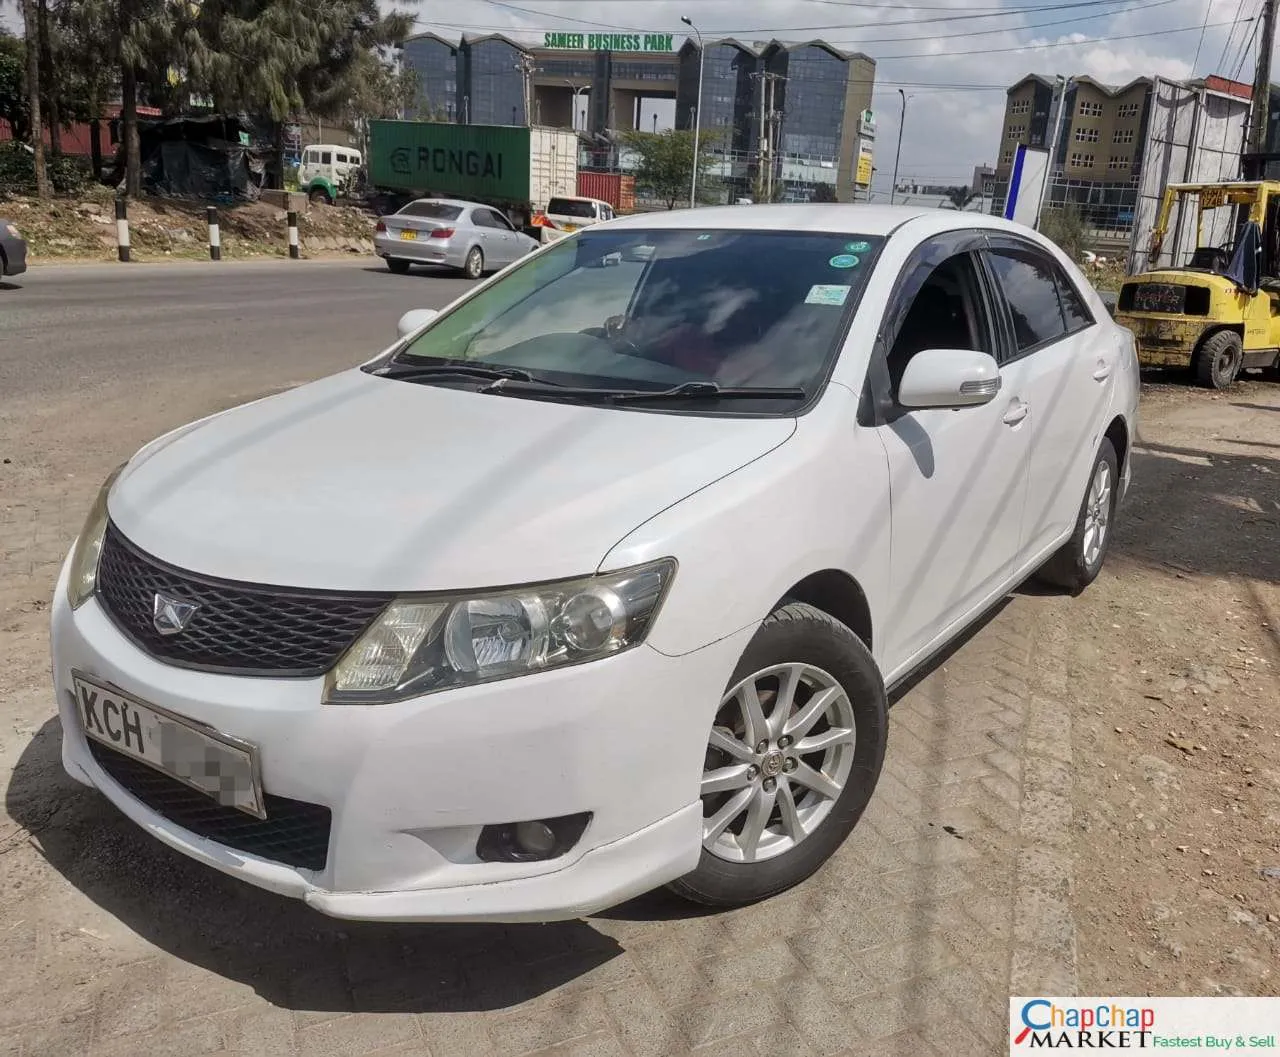 Toyota Allion kenya You Pay 30% Deposit 70% INSTALLMENTS Allion for sale in kenya hire purchase installments EXCLUSIVE Trade in OK (SOLD)